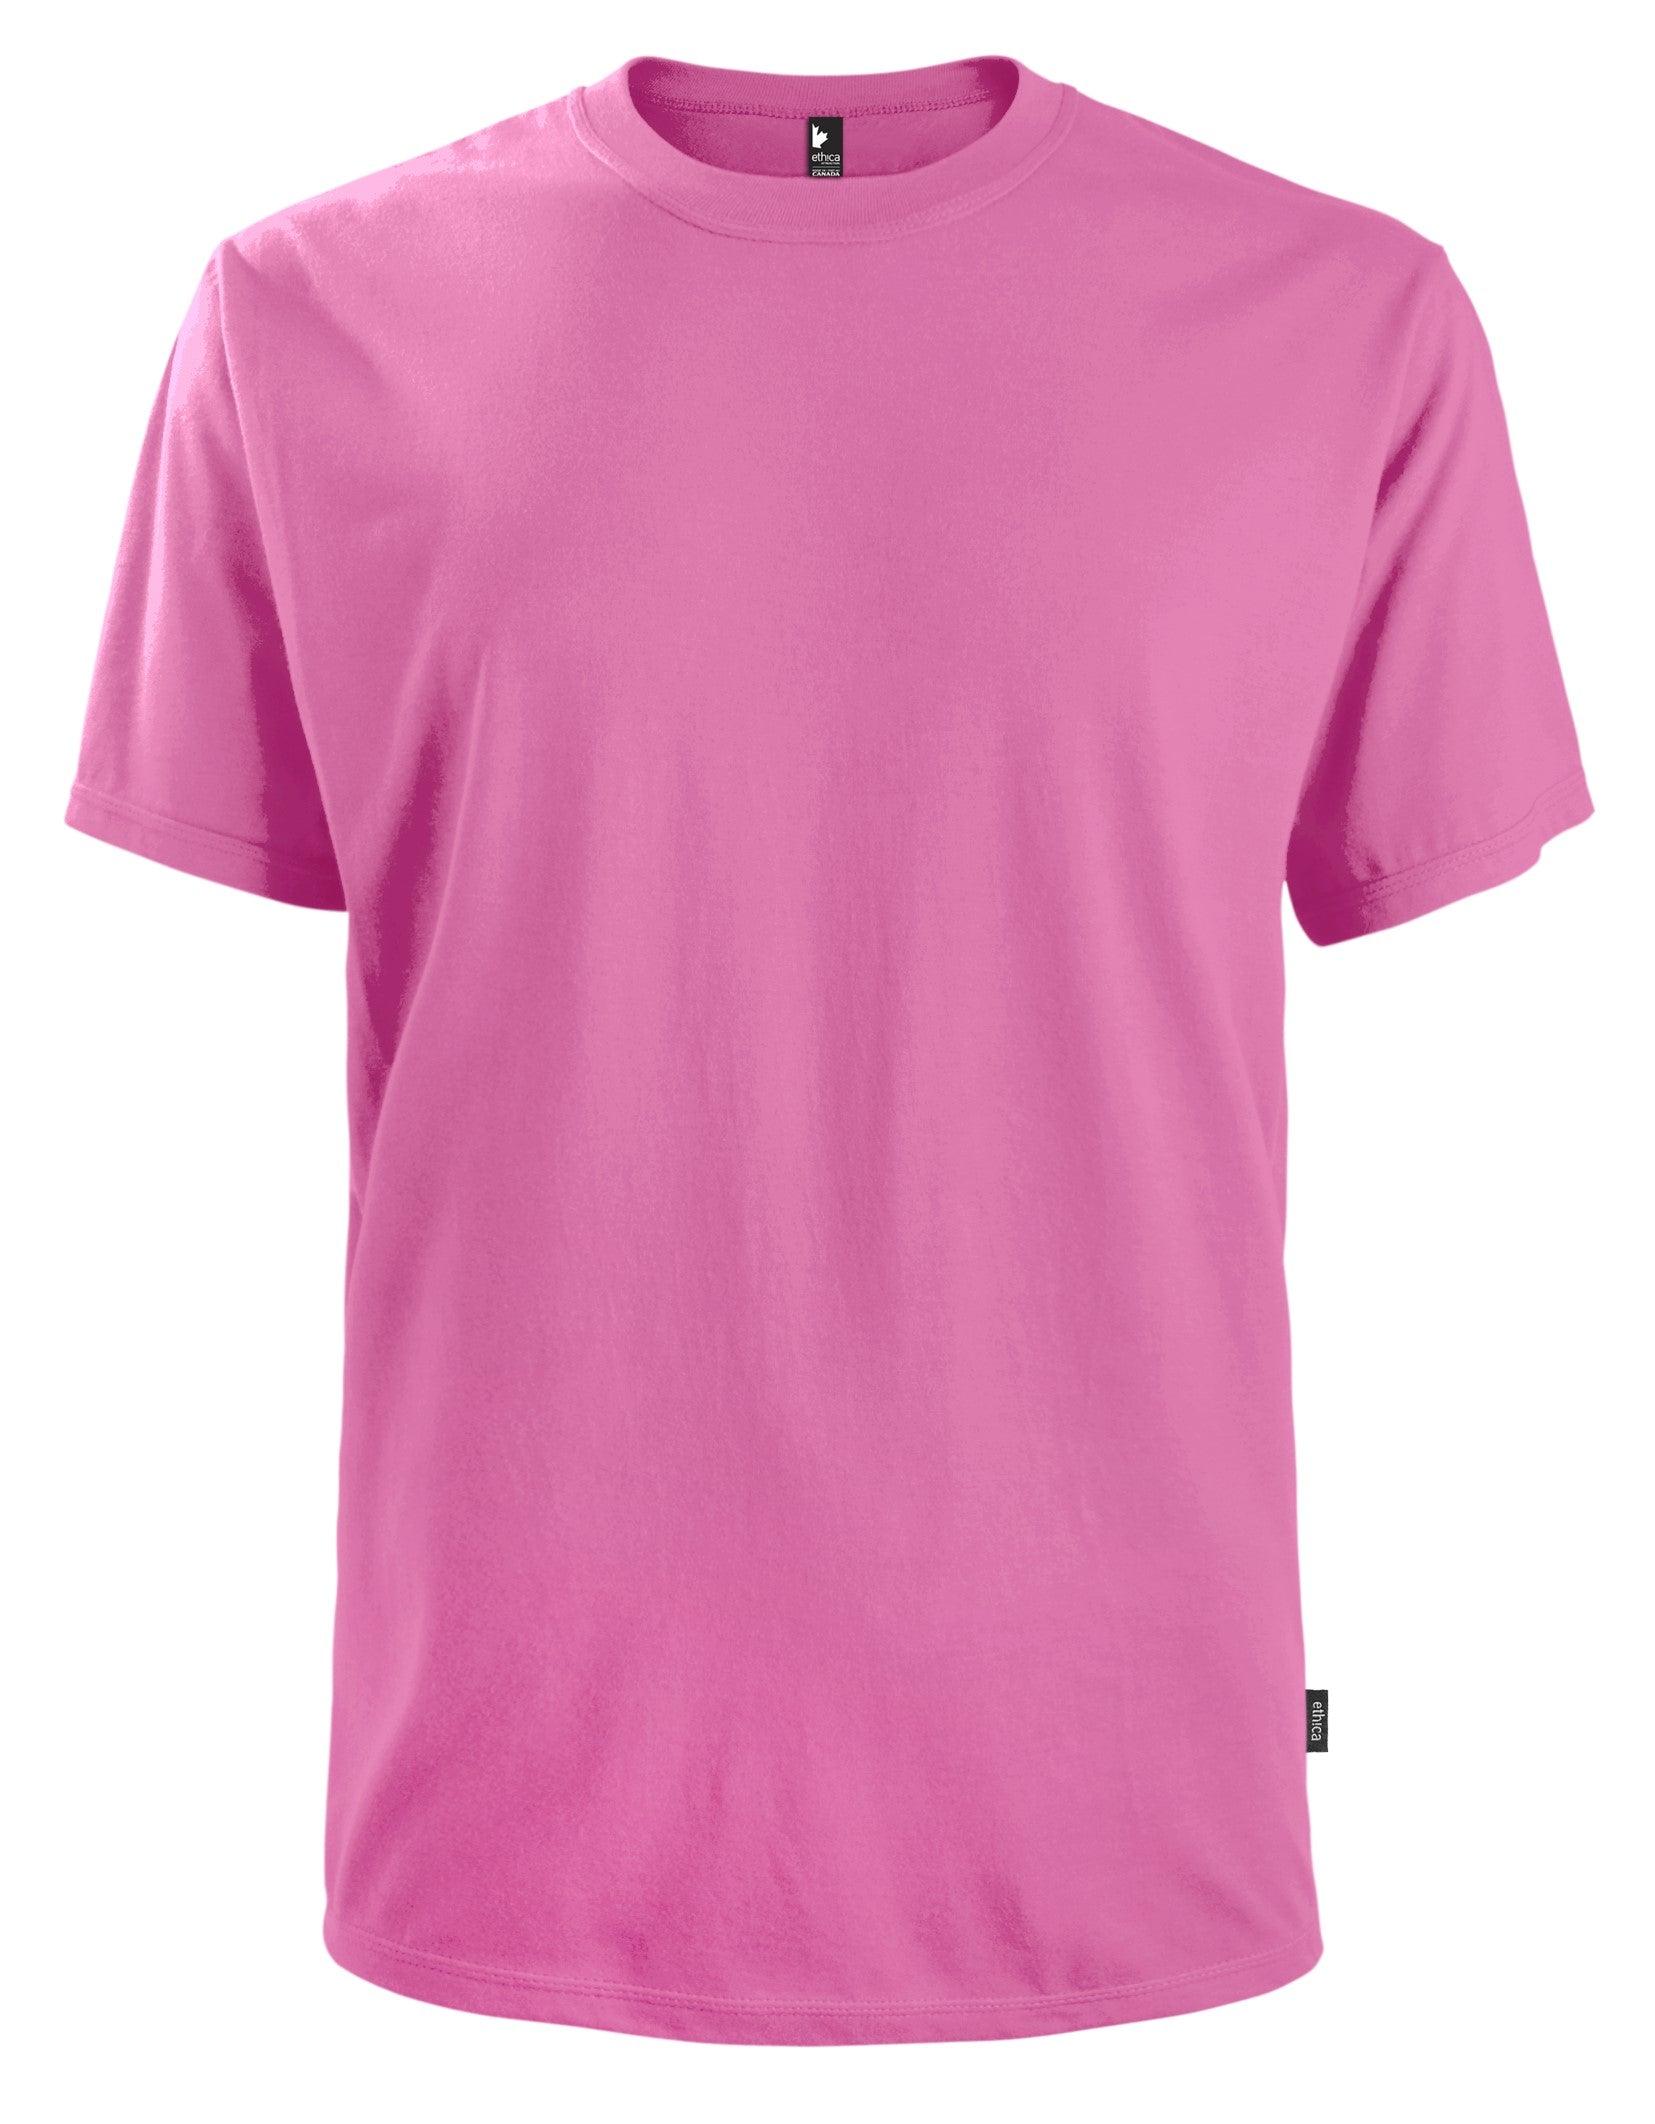 Custom T-Shirts, Screen Printing, Embroidery, Hats, Apparel, Near Me:  Wholesale Women's S/S Fitted T-Shirts, Pink, Medium, Cotton - DollarDa